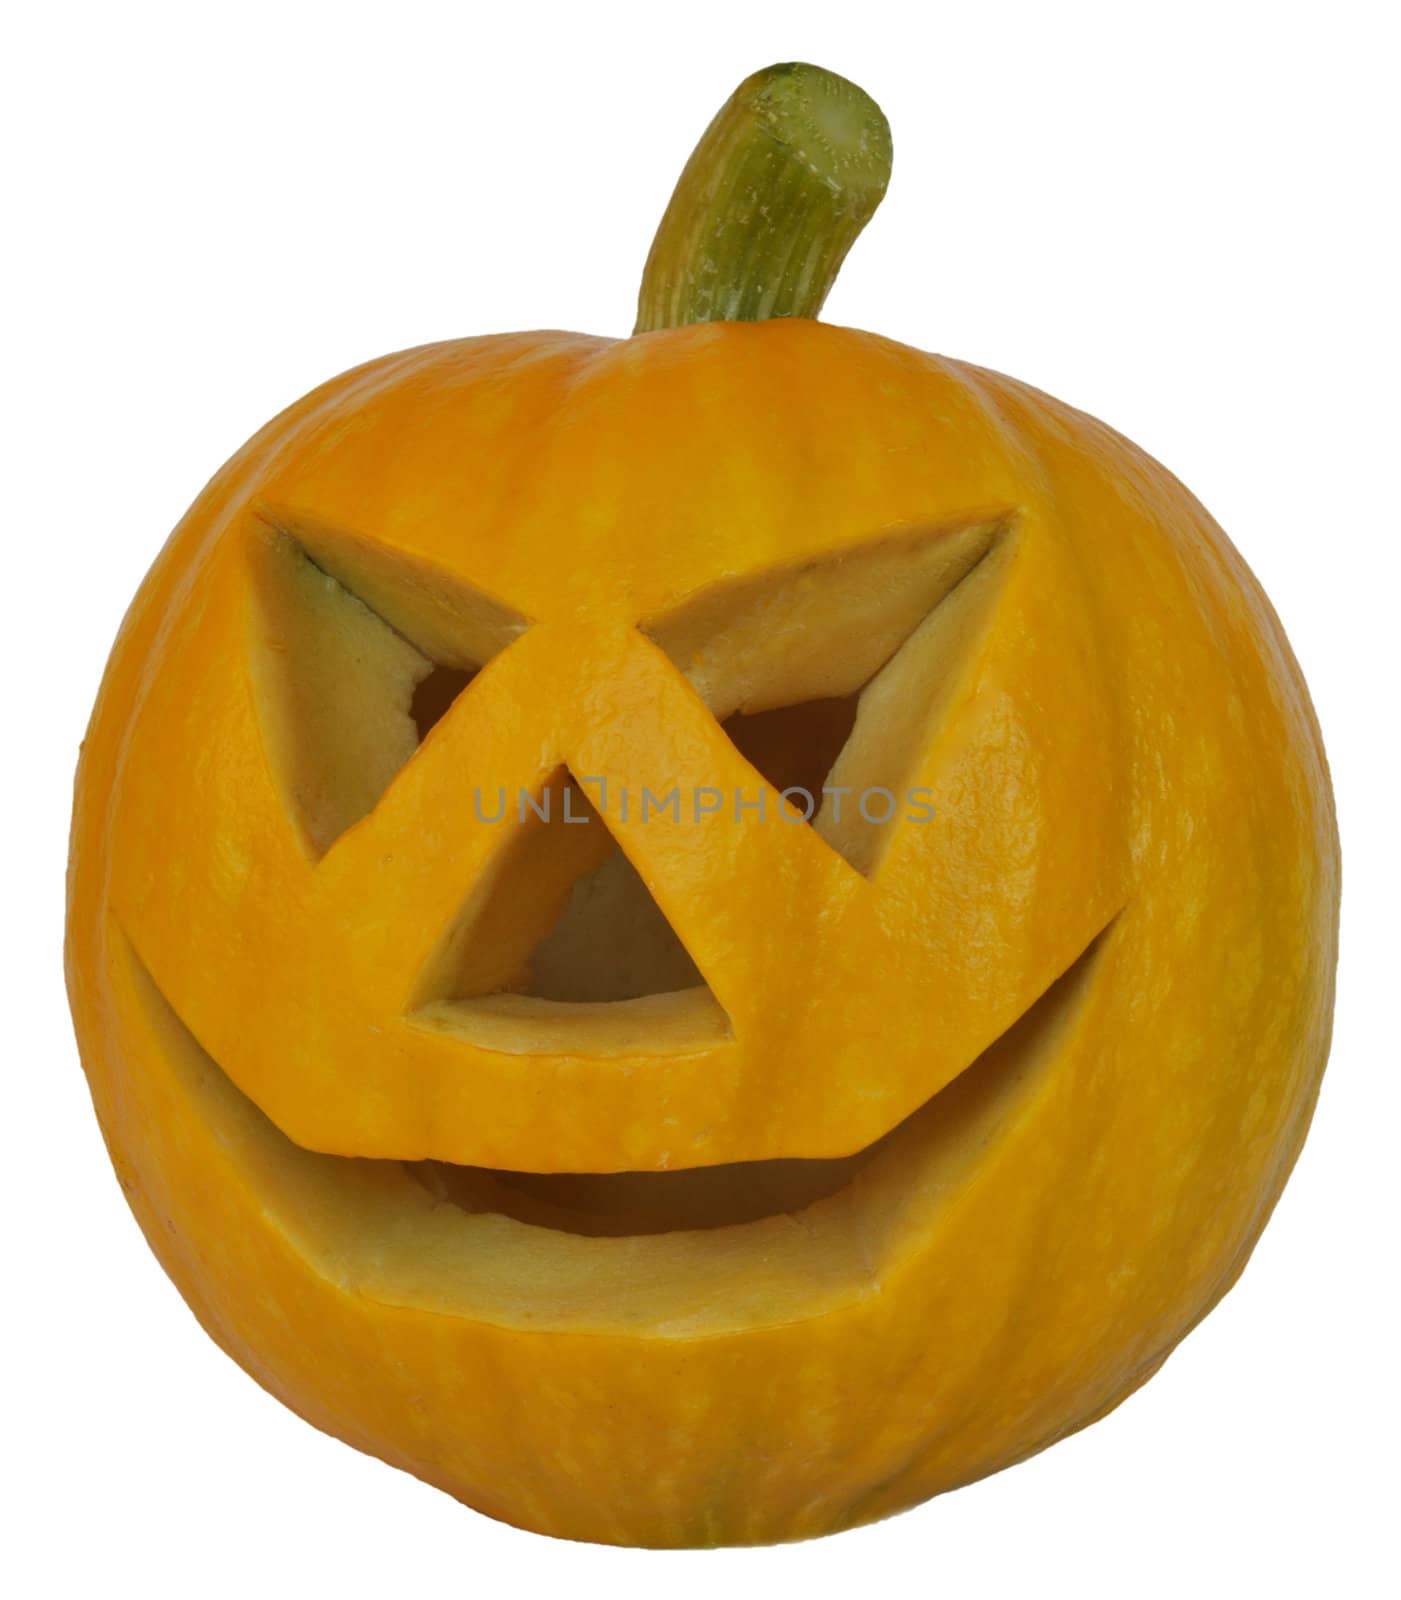 Symbol of a holiday of Halloween: a pumpkin Jack O Lantern, isolated. Very terribly :).